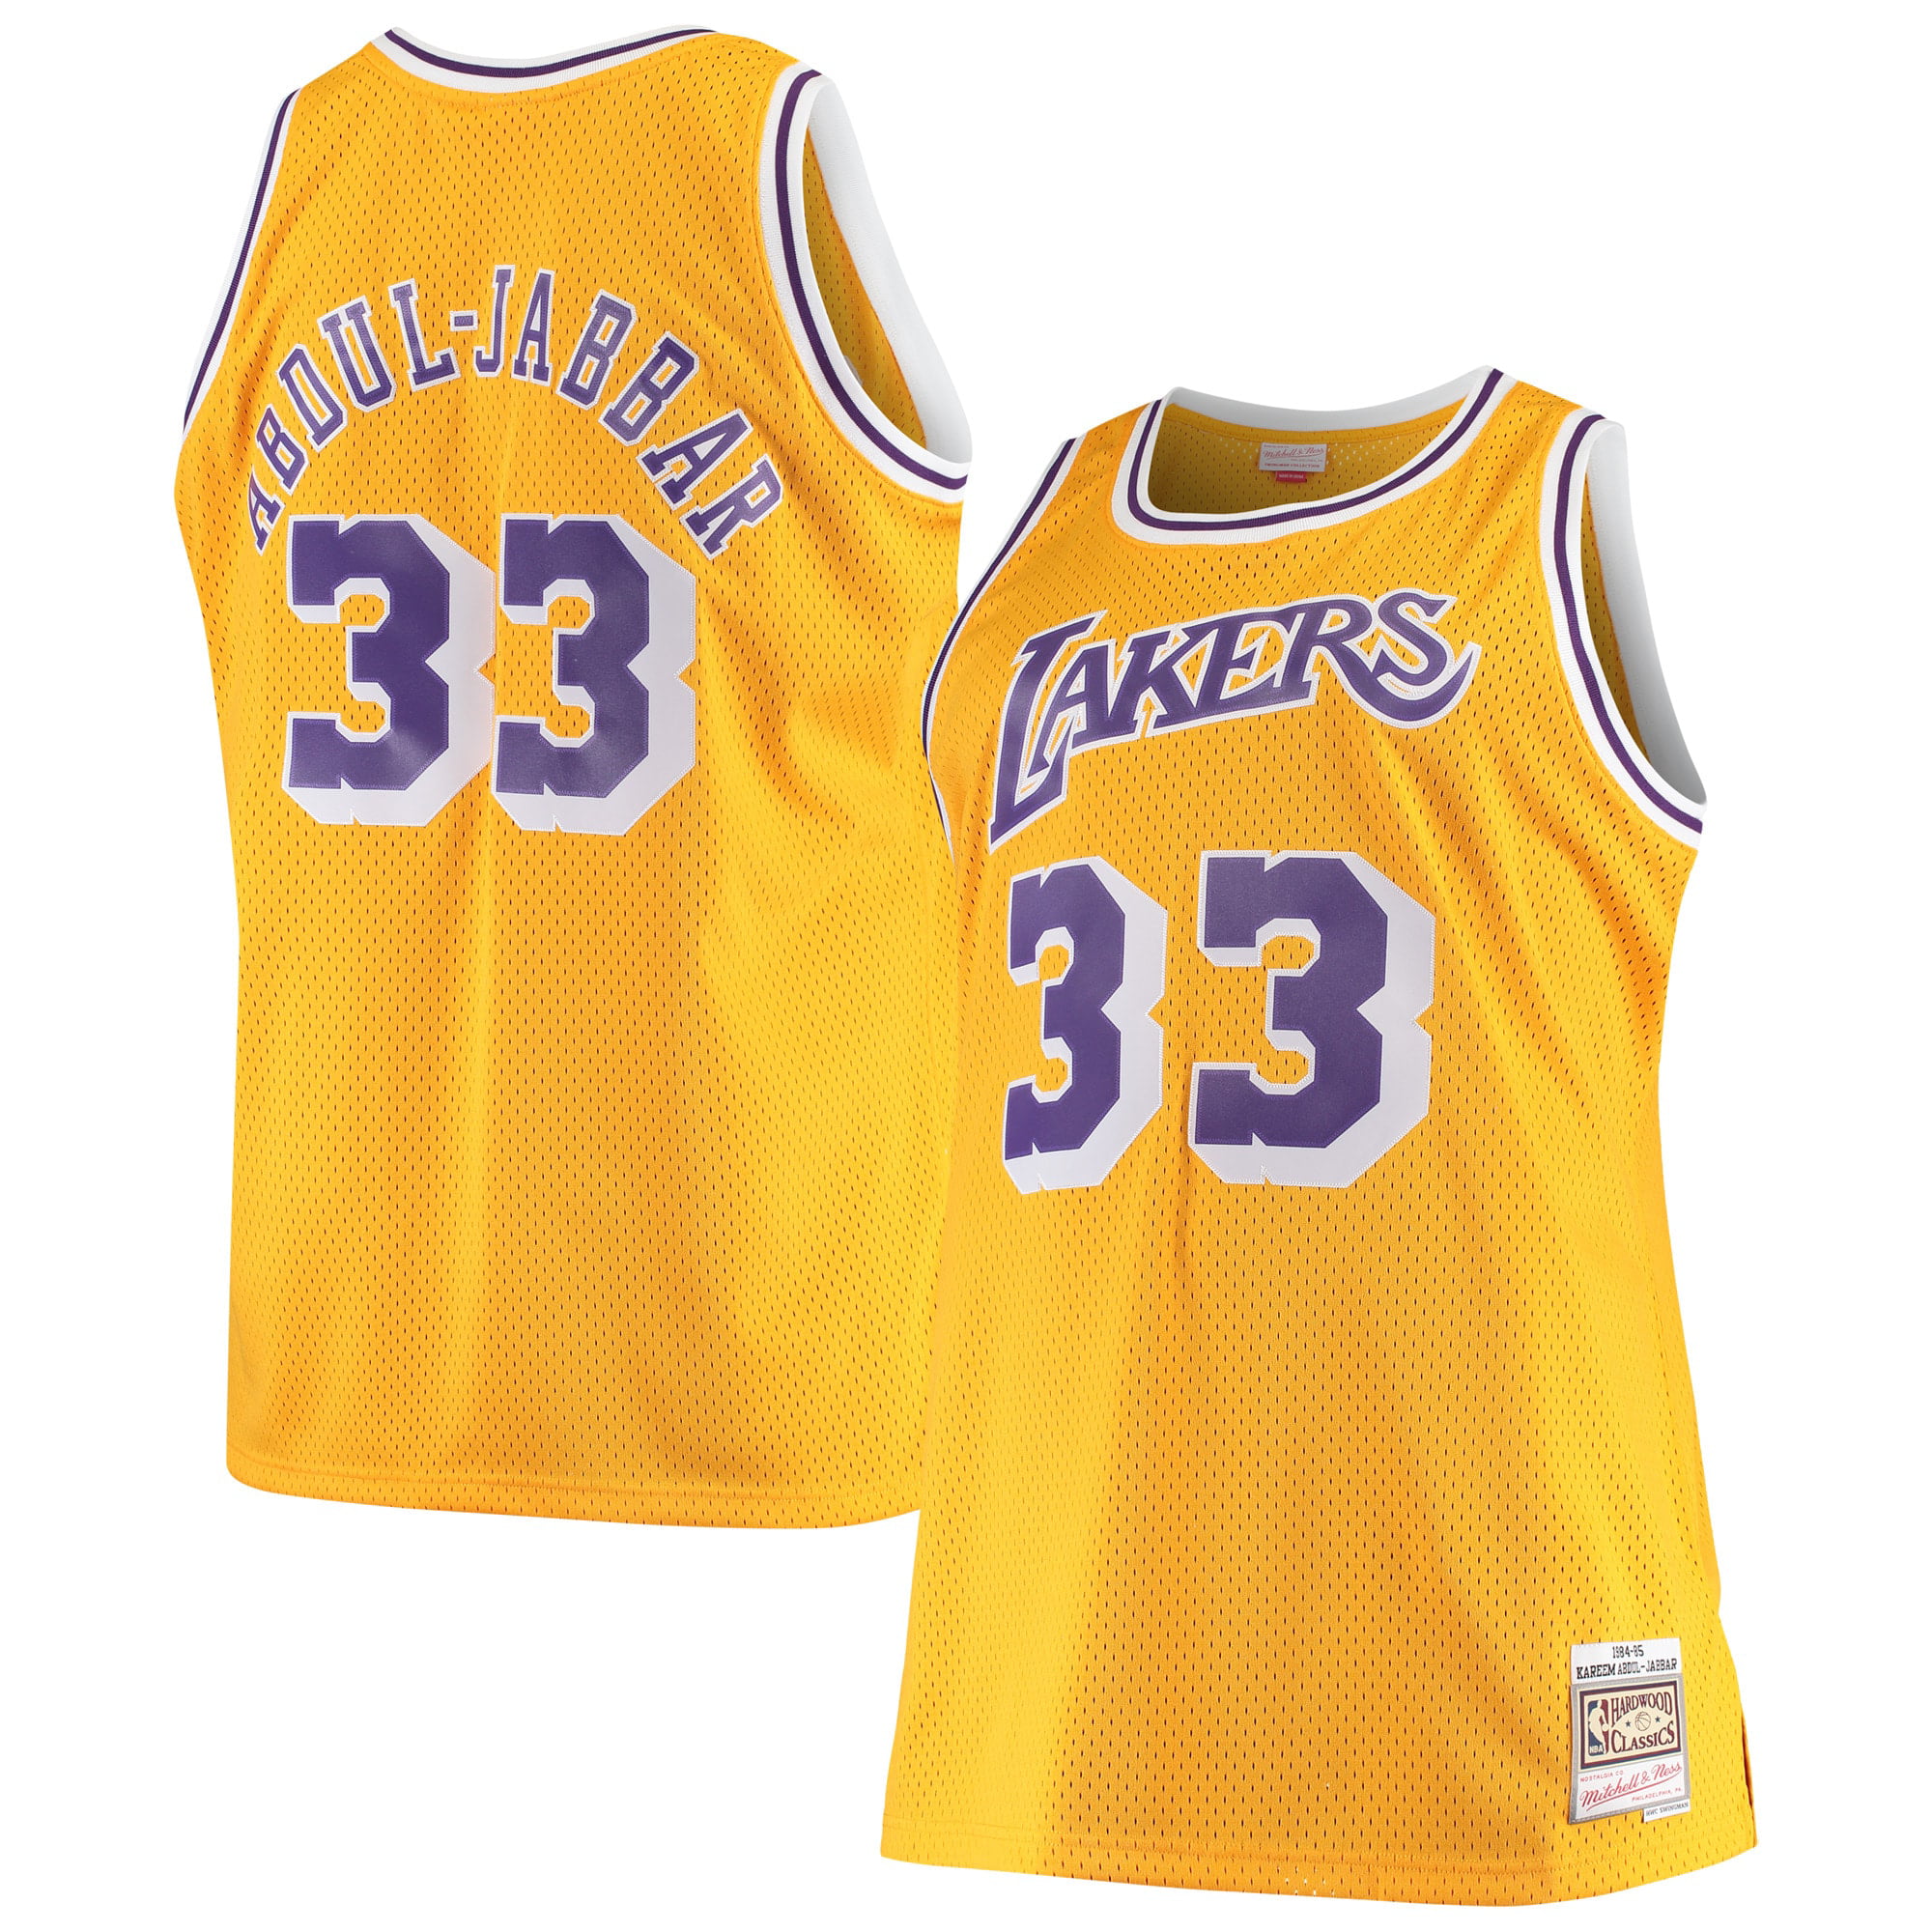 Kareem Abdul-Jabbar Signed Autographed Mitchell & Ness Yellow Home Jersey  Lakers